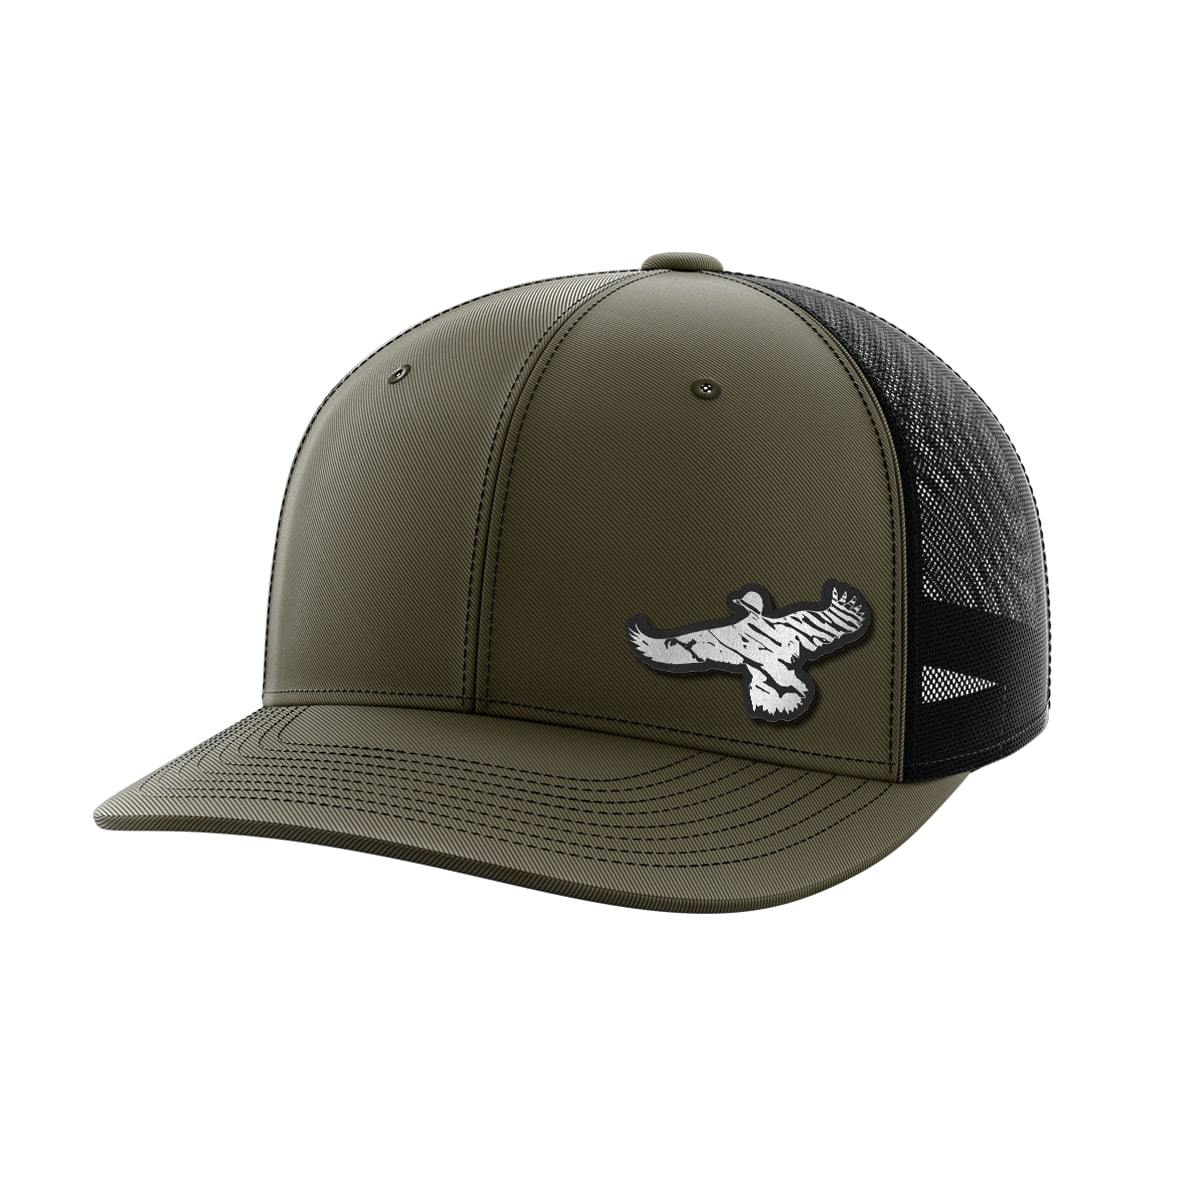 Duck Black Patch Hat - Greater Half